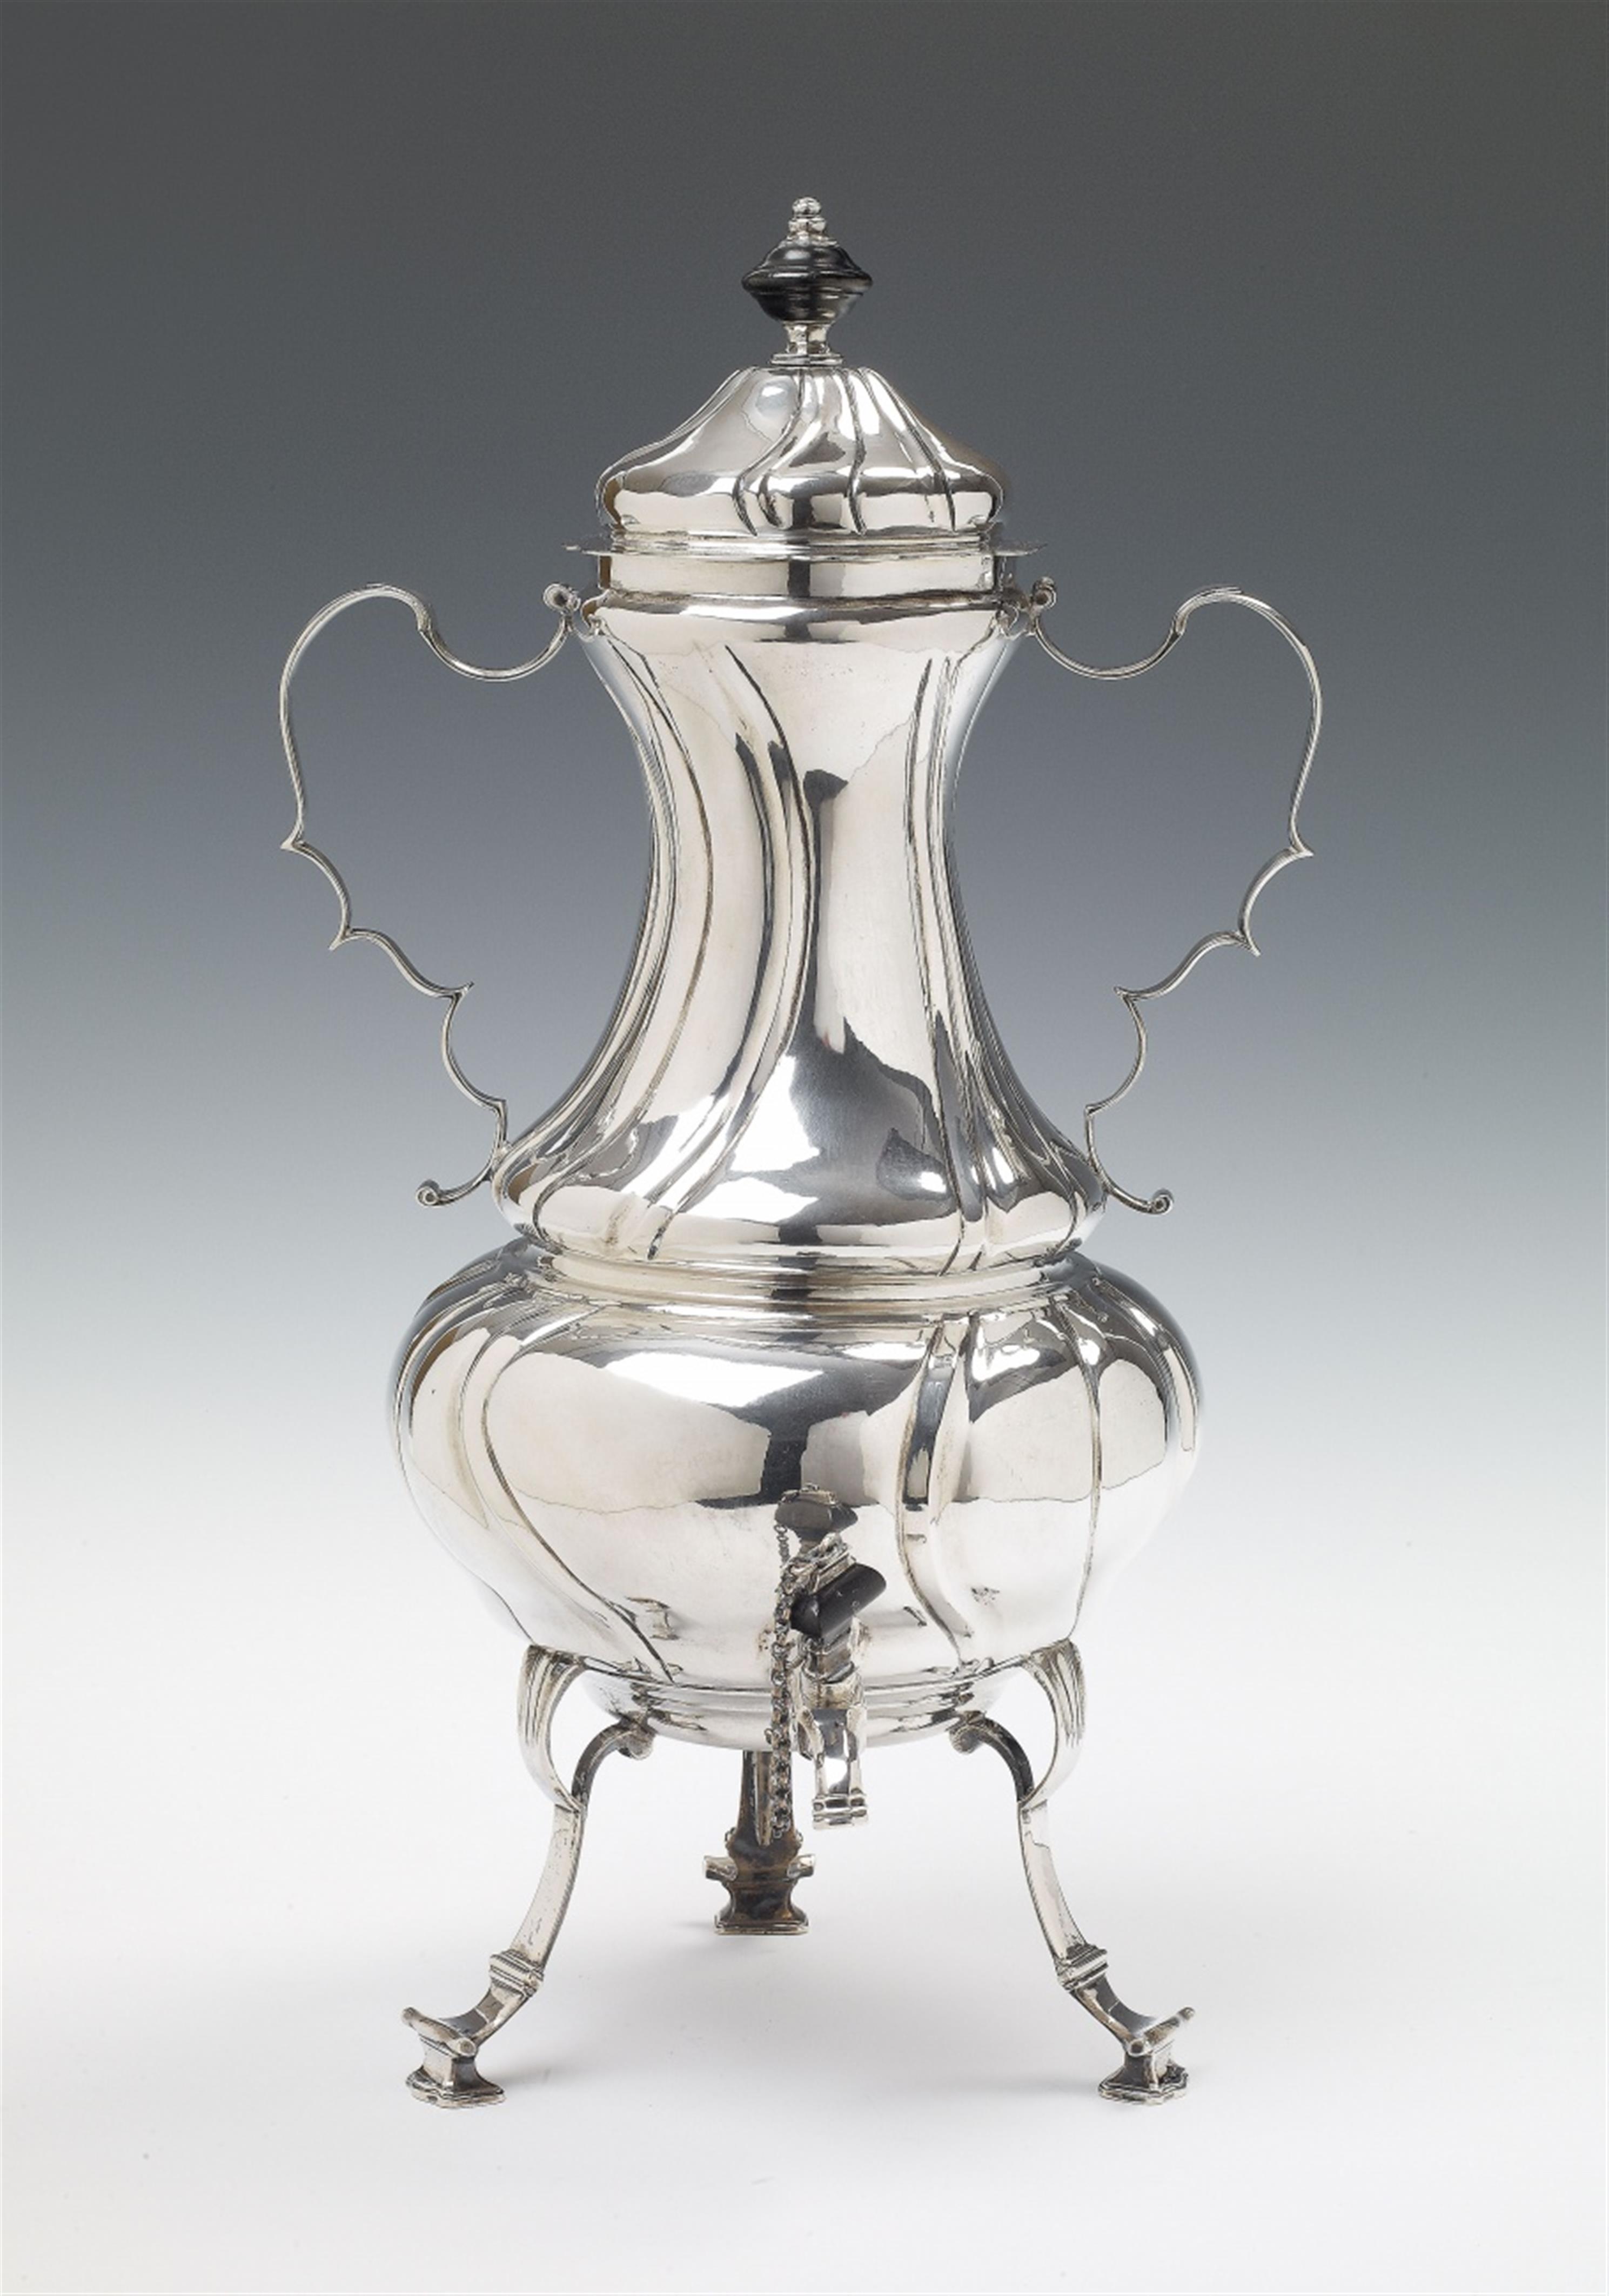 A Cologne silver coffee urn. The handle and finial of ebony. Marks of Hermann Joseph von der Rennen, 1774 - 79. - image-1